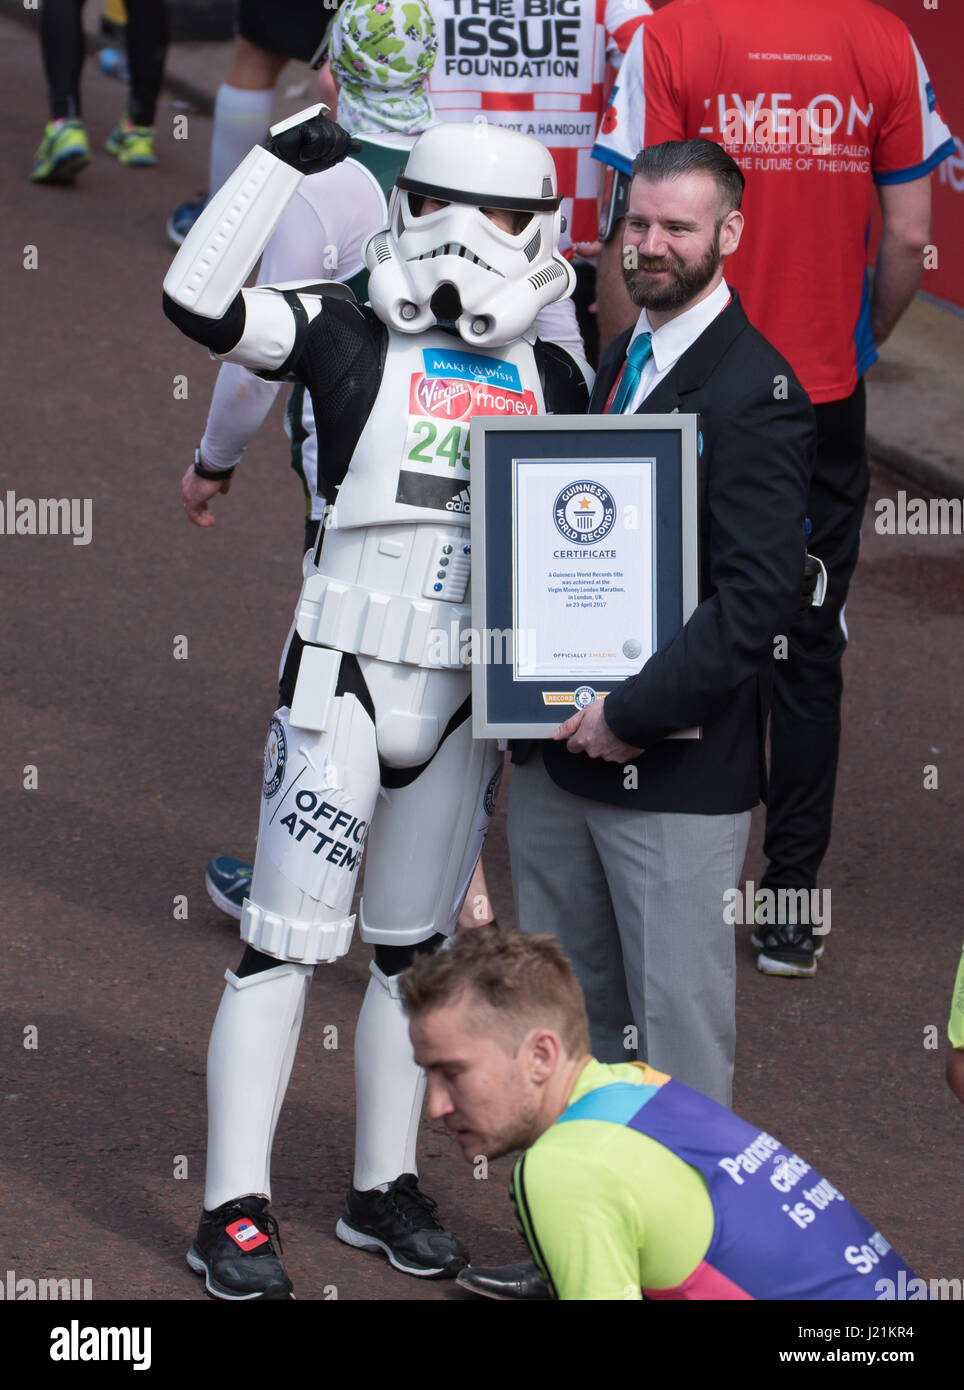 London, UK. 23rd April, 2017.A competitor dressed as a Storm Trooper enters the Guinness Book of Records as the fastest Storm Trooper at the Virgin Money Marathon Credit: Ian Davidson/Alamy Live News Stock Photo